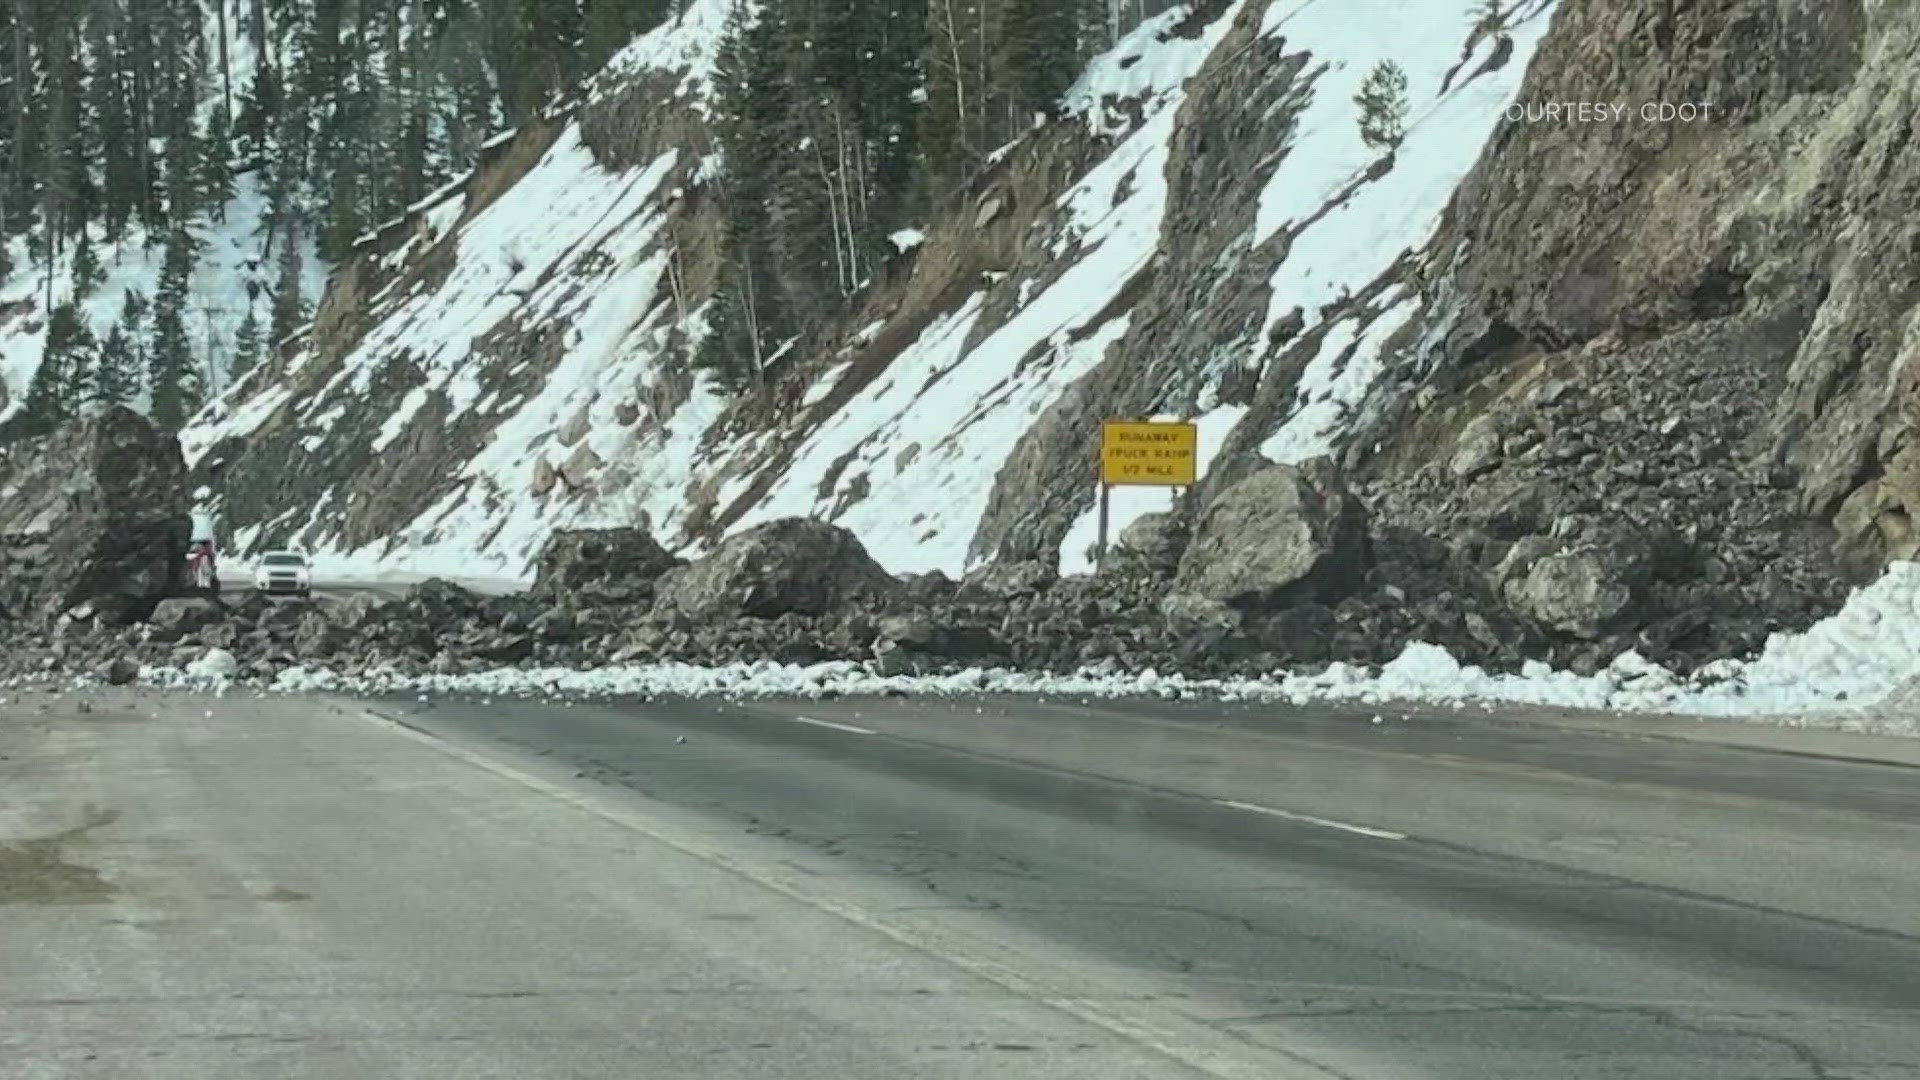 The closure is about 17 miles east of Pagosa Springs. CDOT said one lane was back open about noon Monday.